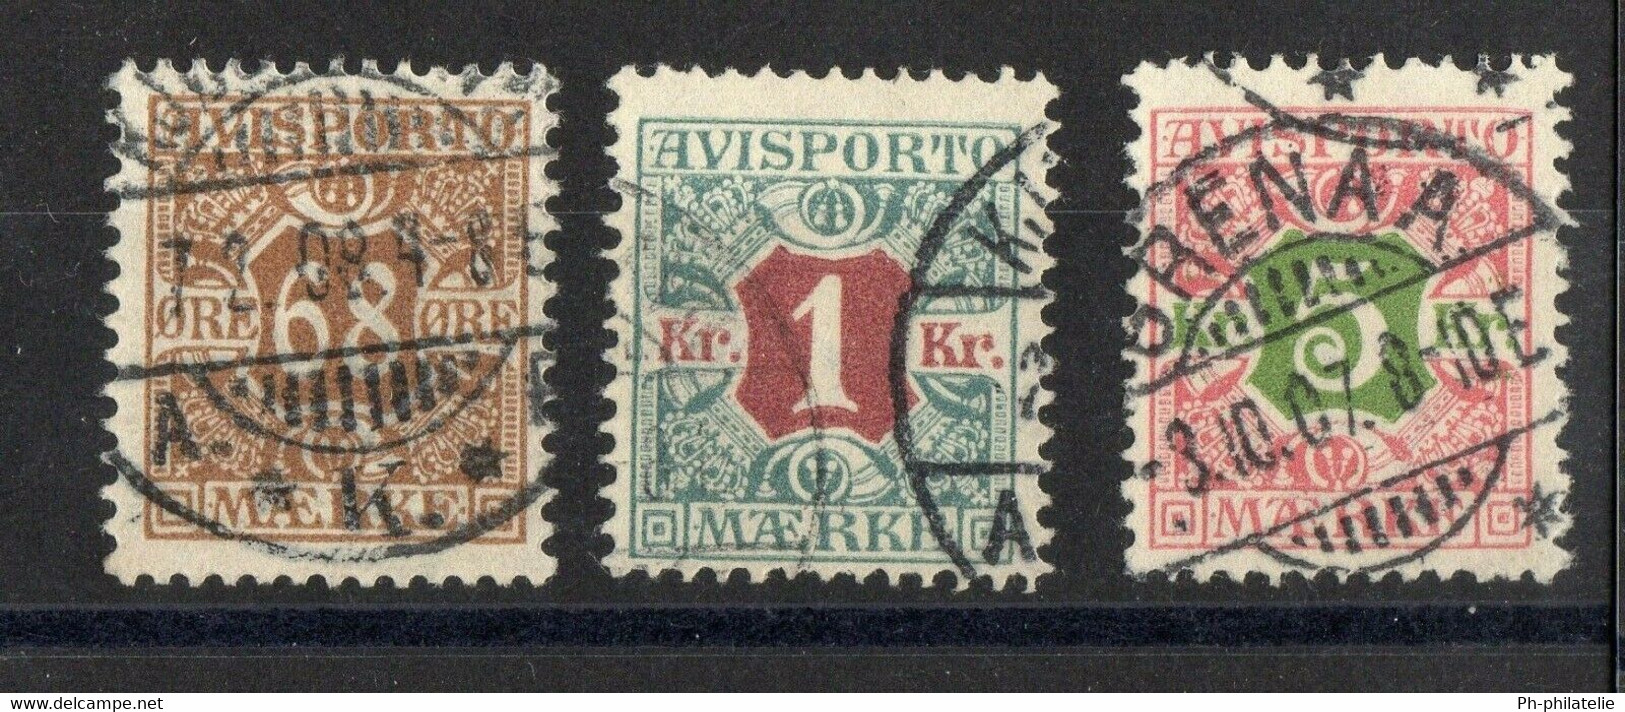 DANEMARK: SERIE COMPLETE DE 3 TIMBRES JOURNAUX OBLITERES N°7/9 - Used Stamps